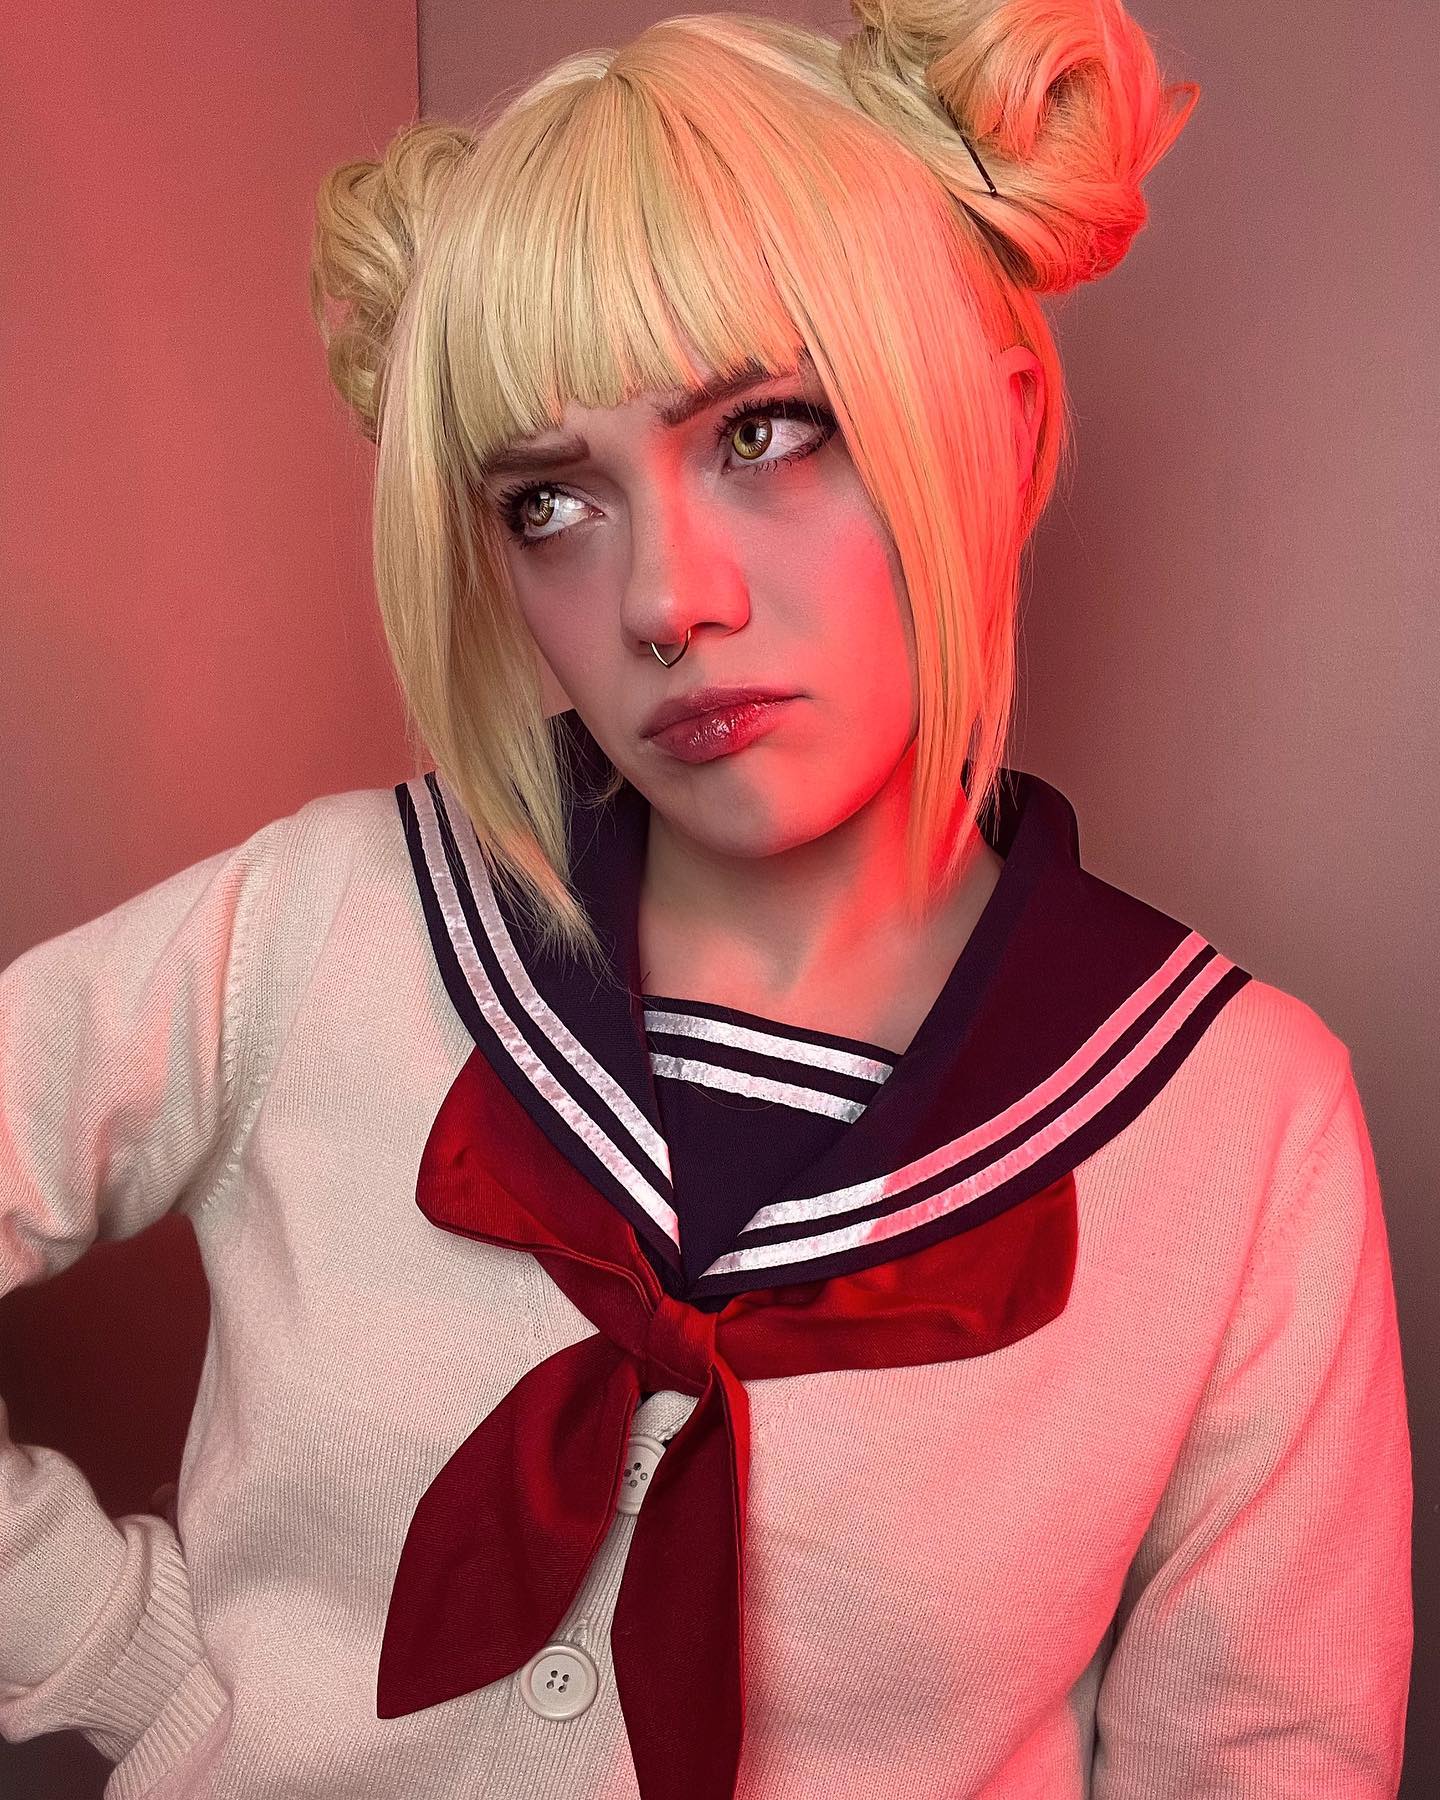 probably getting lectured by dabi or whatever 🙄👿
.
.
.
#mha #mhacosplay #myheroacademia #myheroacademiacosplay #bnha #bnhacosplay #bokunoheroacademia #bokunoheroacademiacosplay #toga #togacosplay #togahimiko #togahimikocosplay #leagueofvillains #leagueofvillainscosplay #cosplay #cosplaygirl